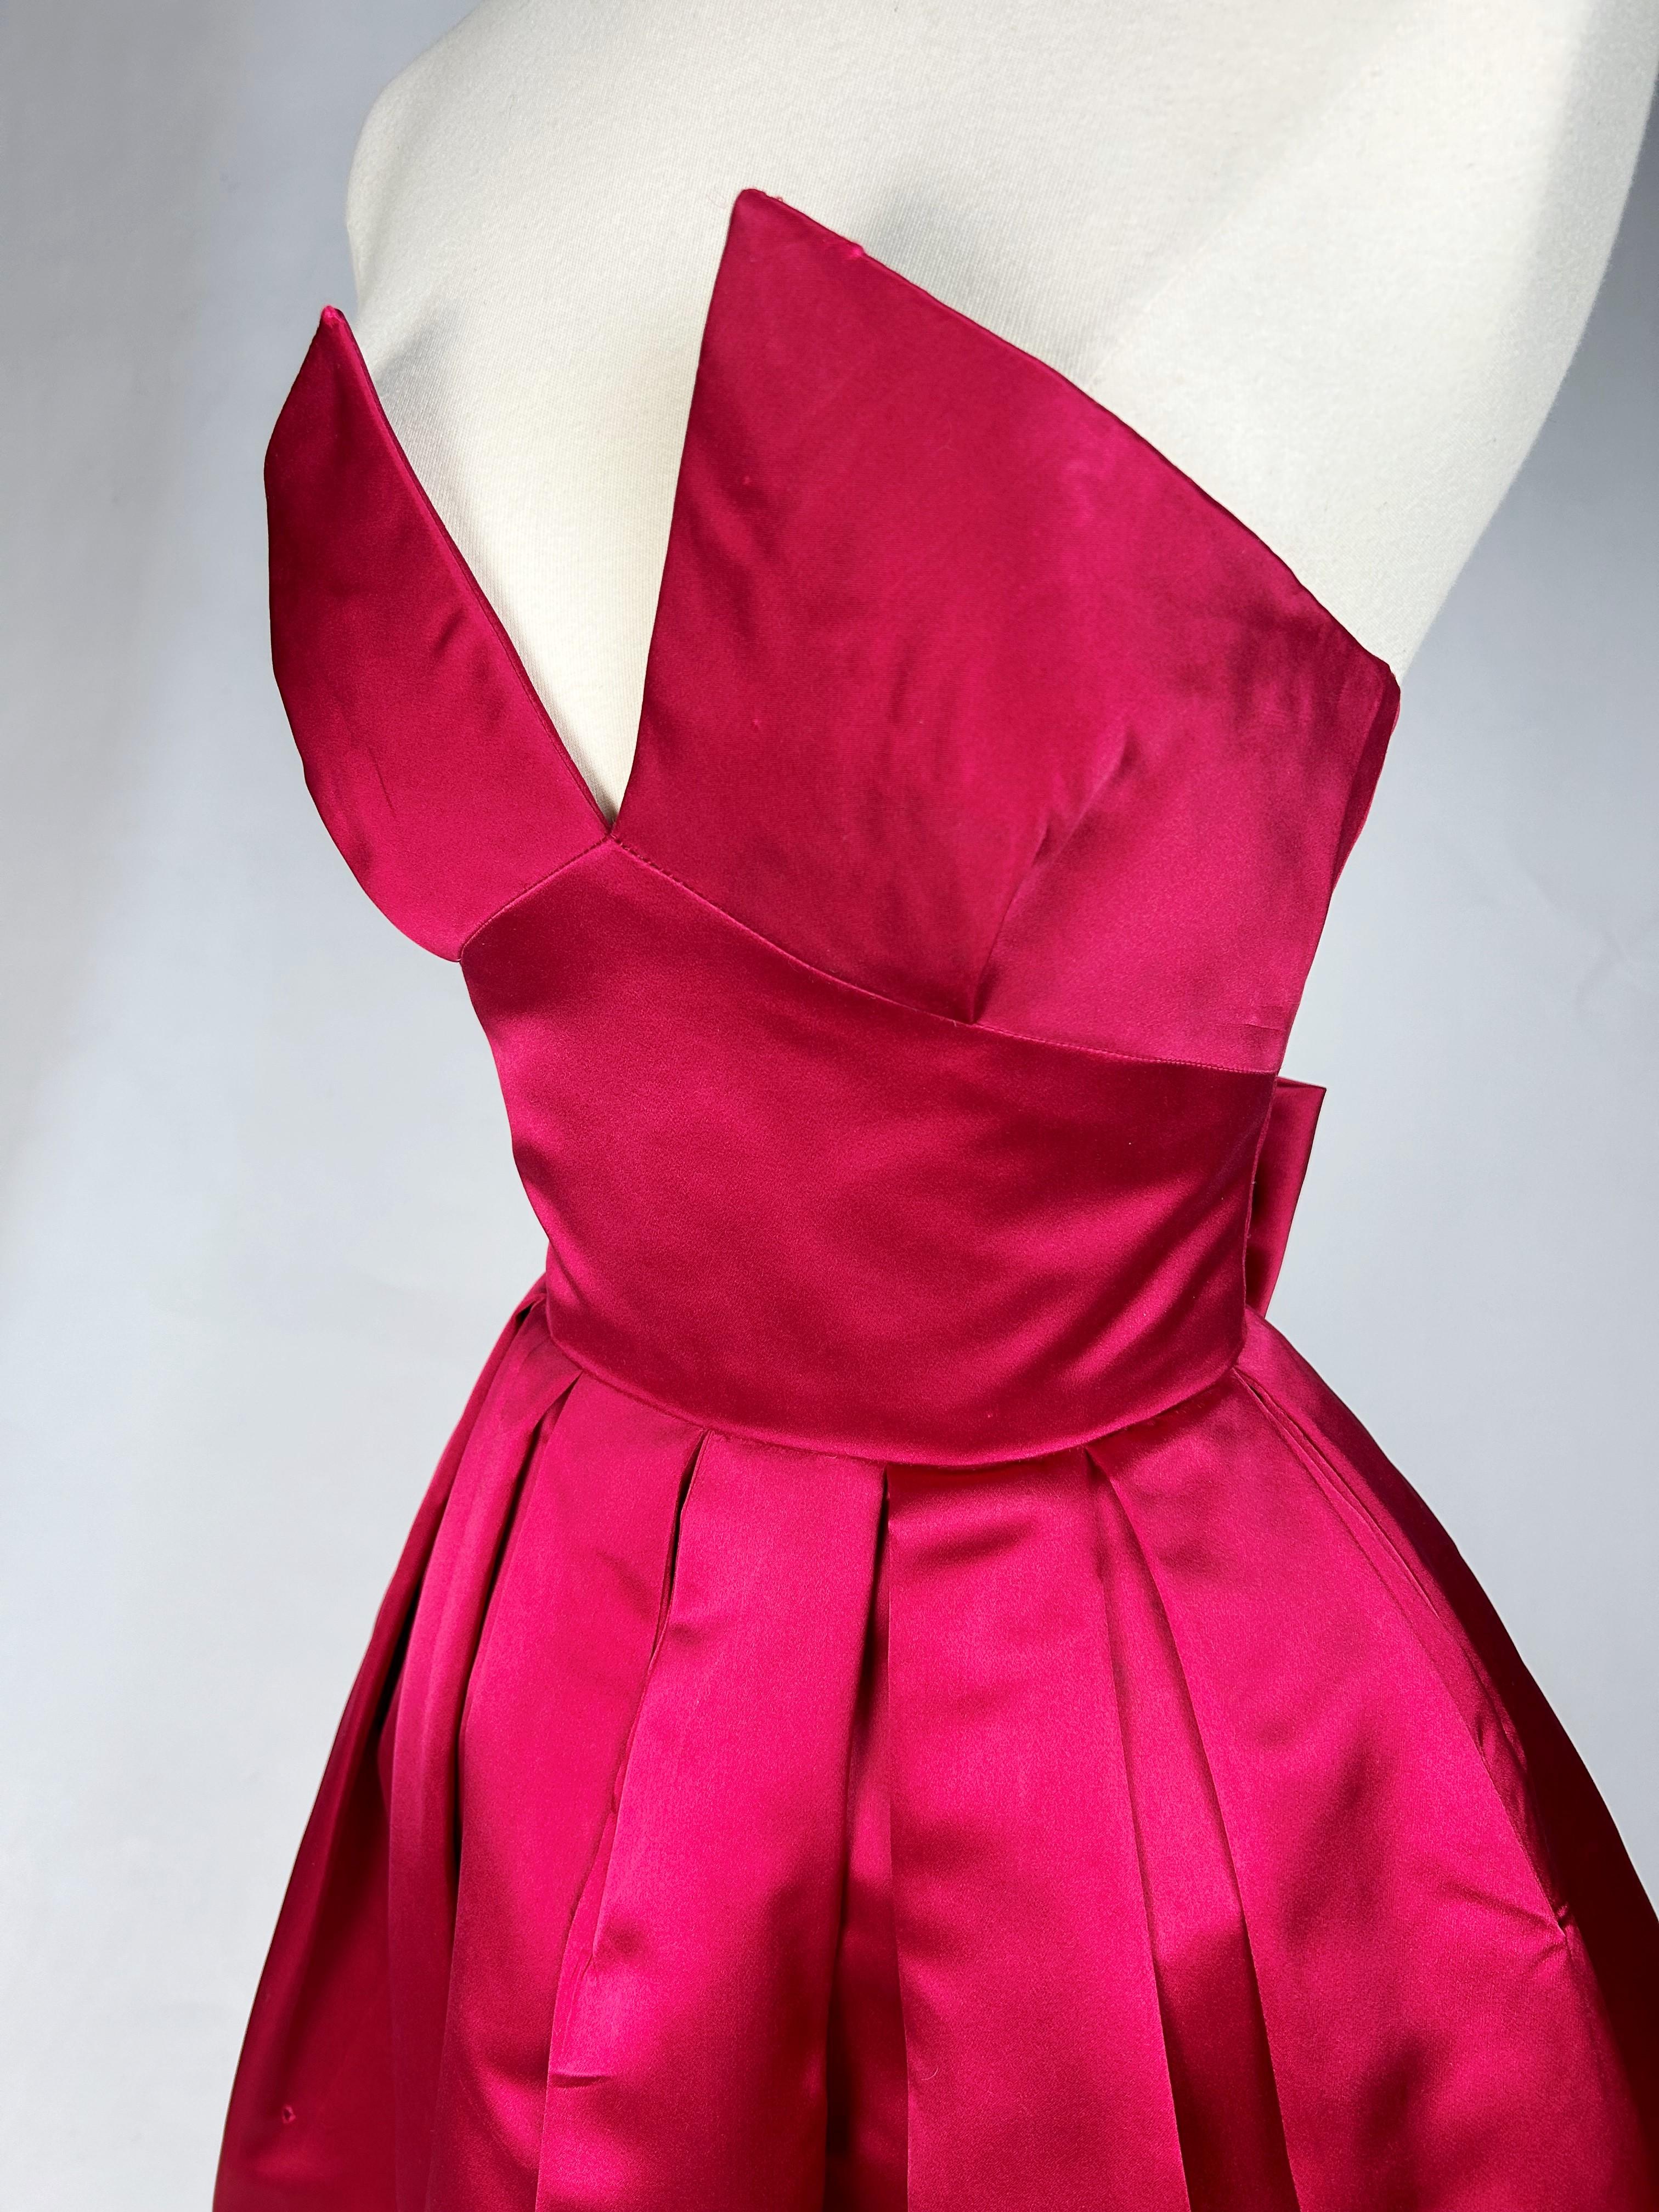 Circa 1955

Paris

Raspberry satin cocktail dress by Claire Comte, 17 bd des Capucines Paris, dating from the 1950s. In the style of Christian Dior, this bare-back dress with plunging neckline forms two points on the bust and the tight, openwork